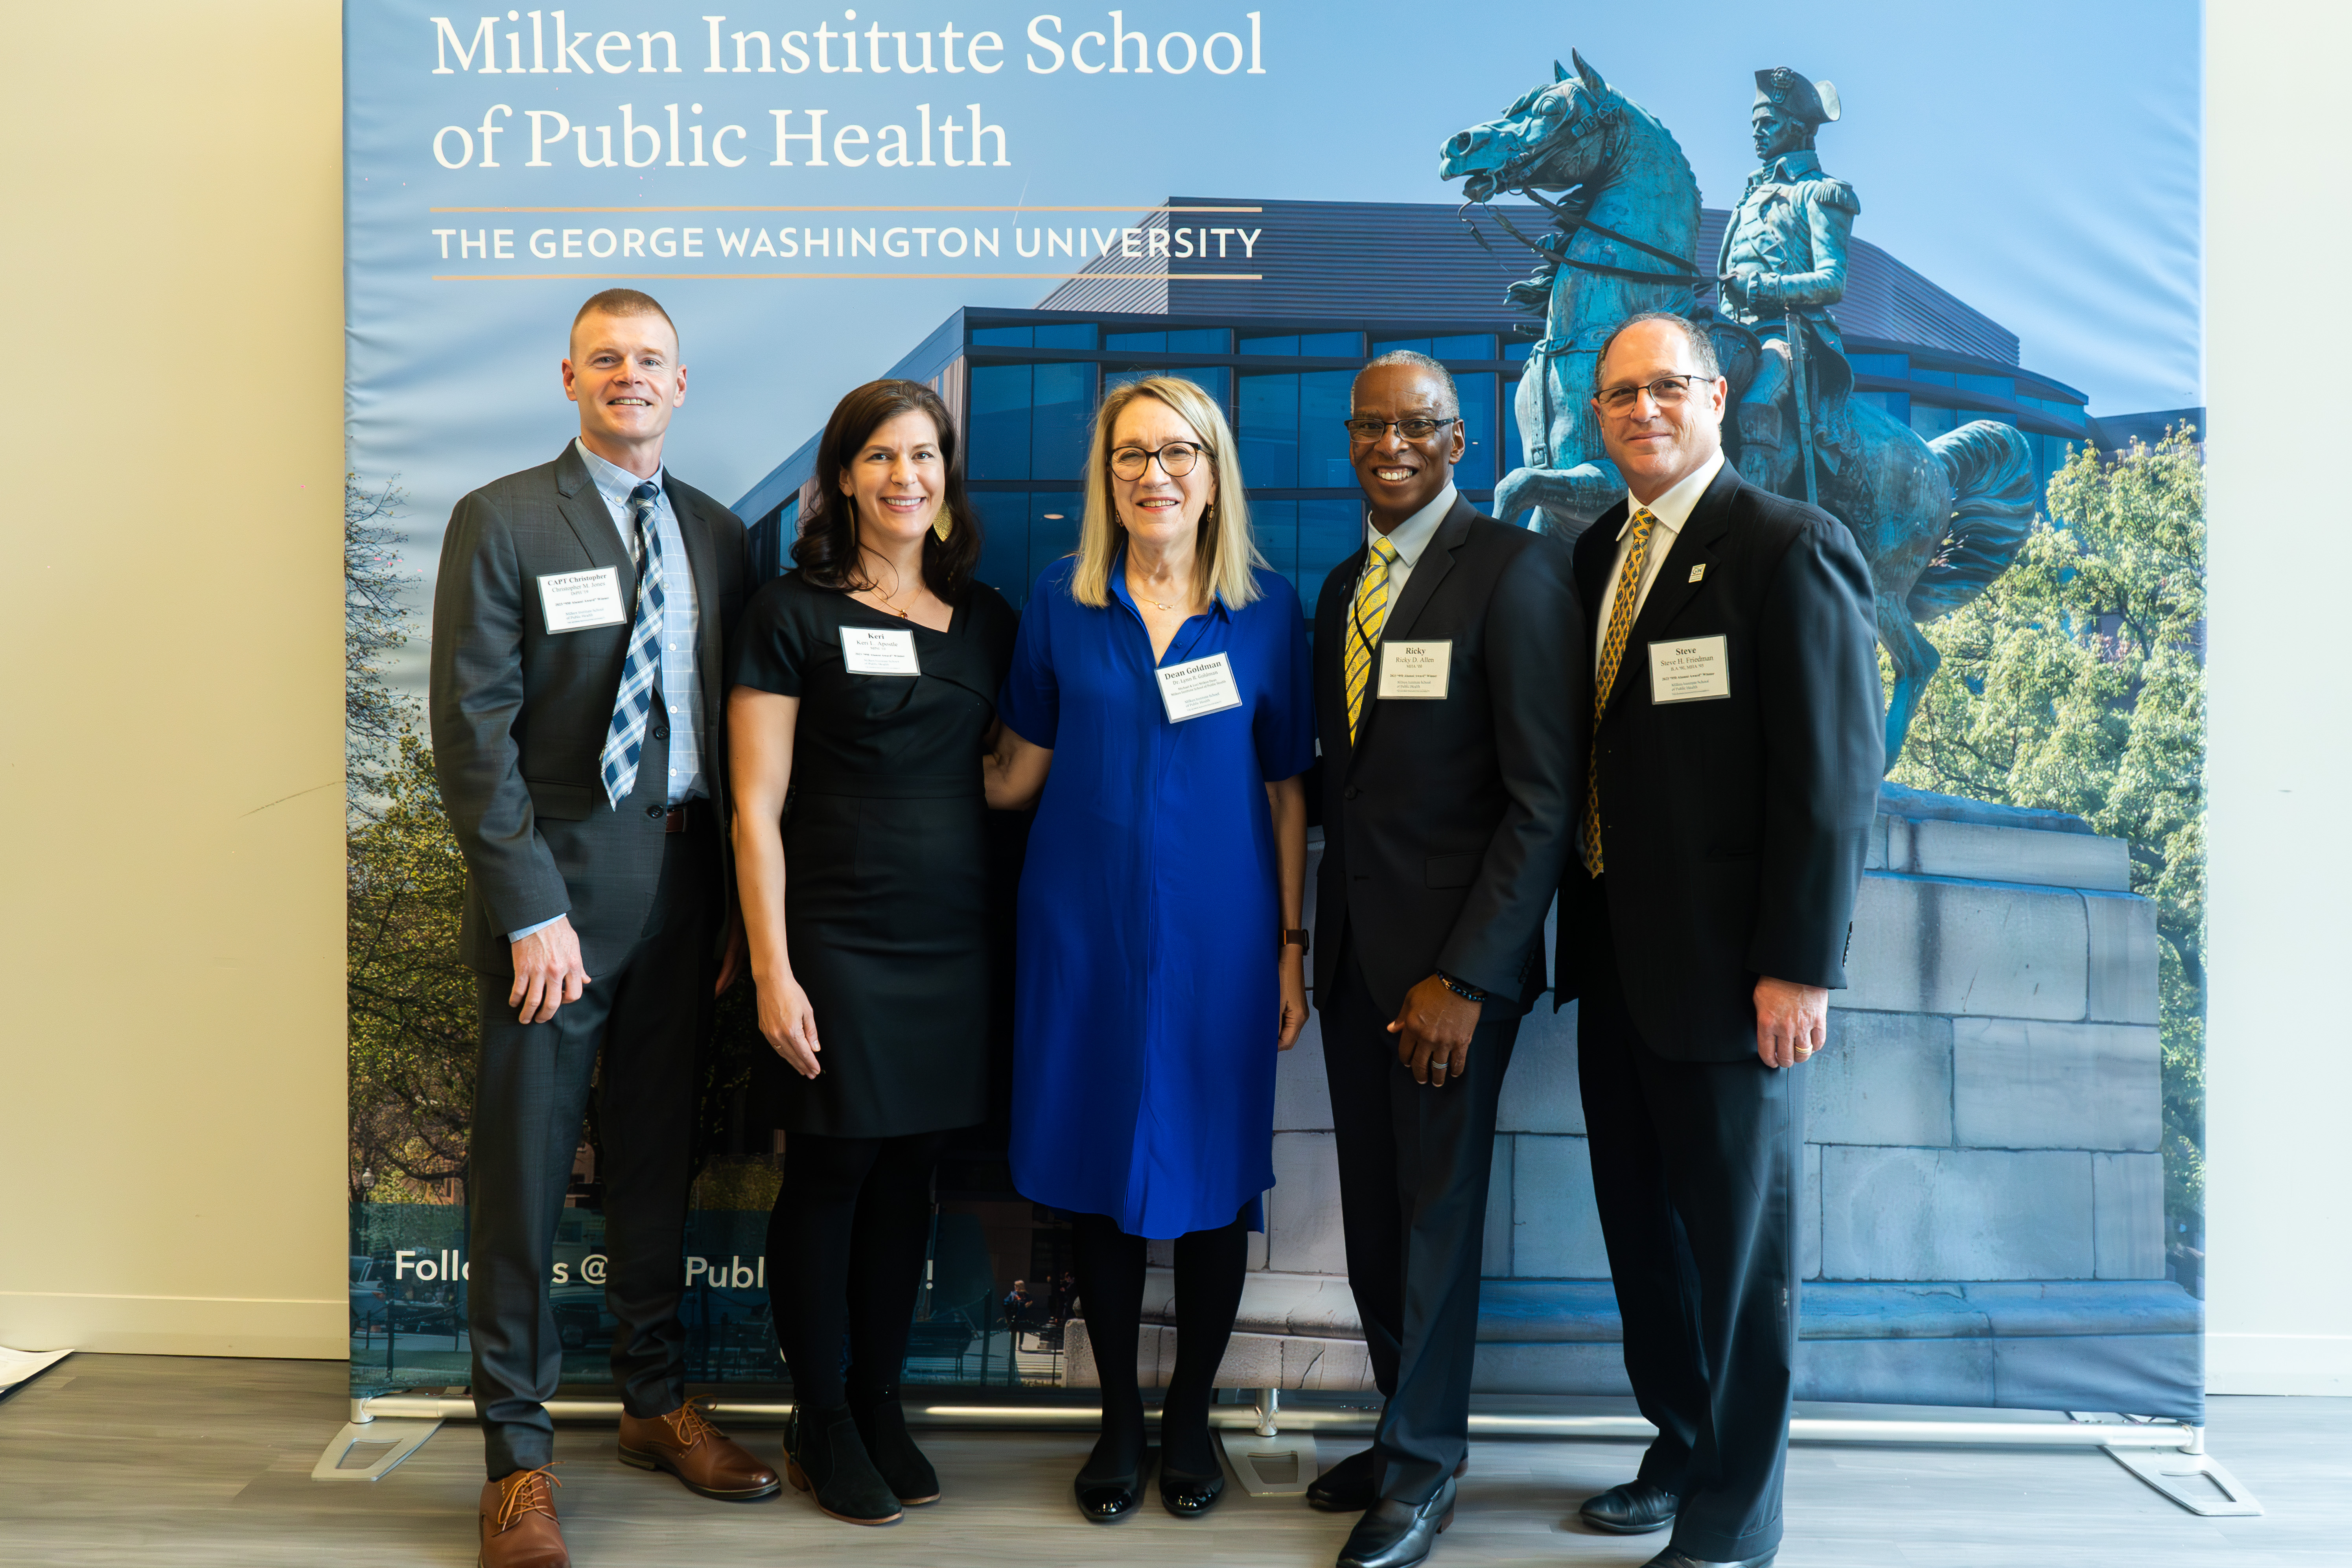 Dean Lynn R. Goldman is flanked by four alumni awardees: Christopher Jones and Keri Apostle are at left, and Ricky D. Allen and Steve Friedman are at right